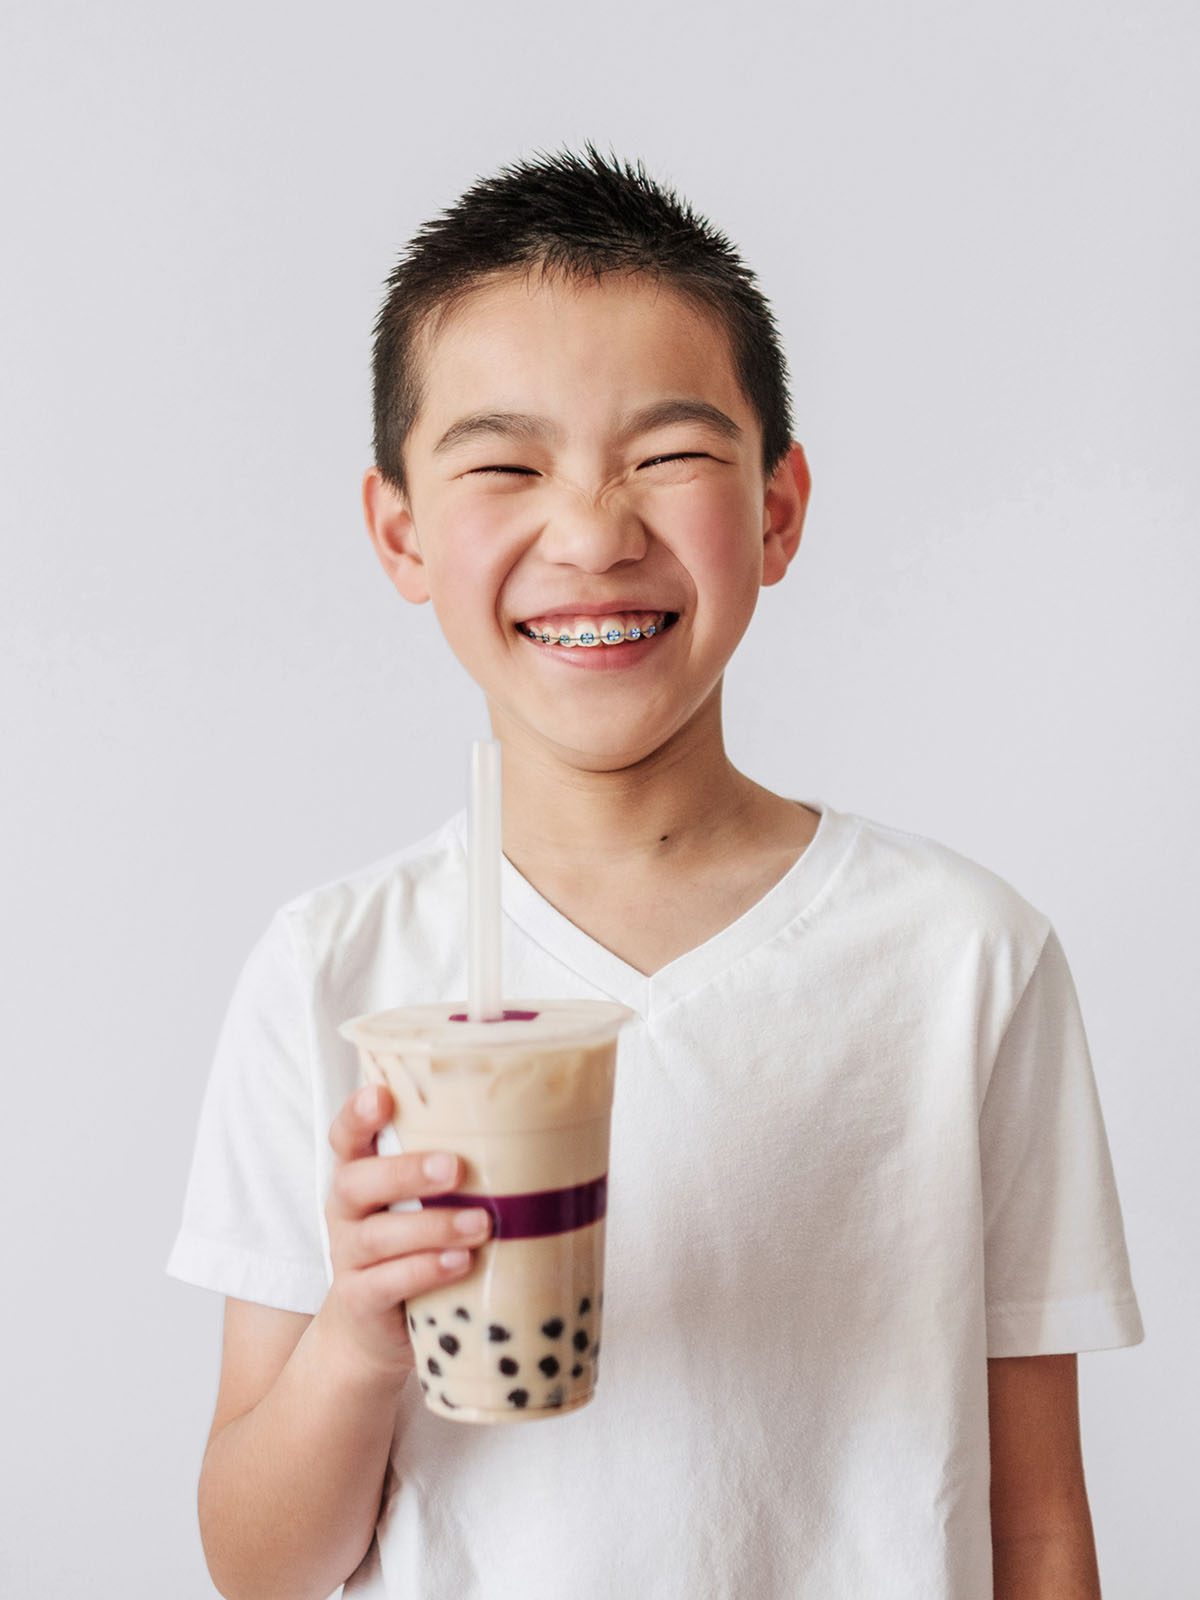 Young boy drinking boba tea and happy about his braces from his family orthodontist near Arden Arcade, Sacramento